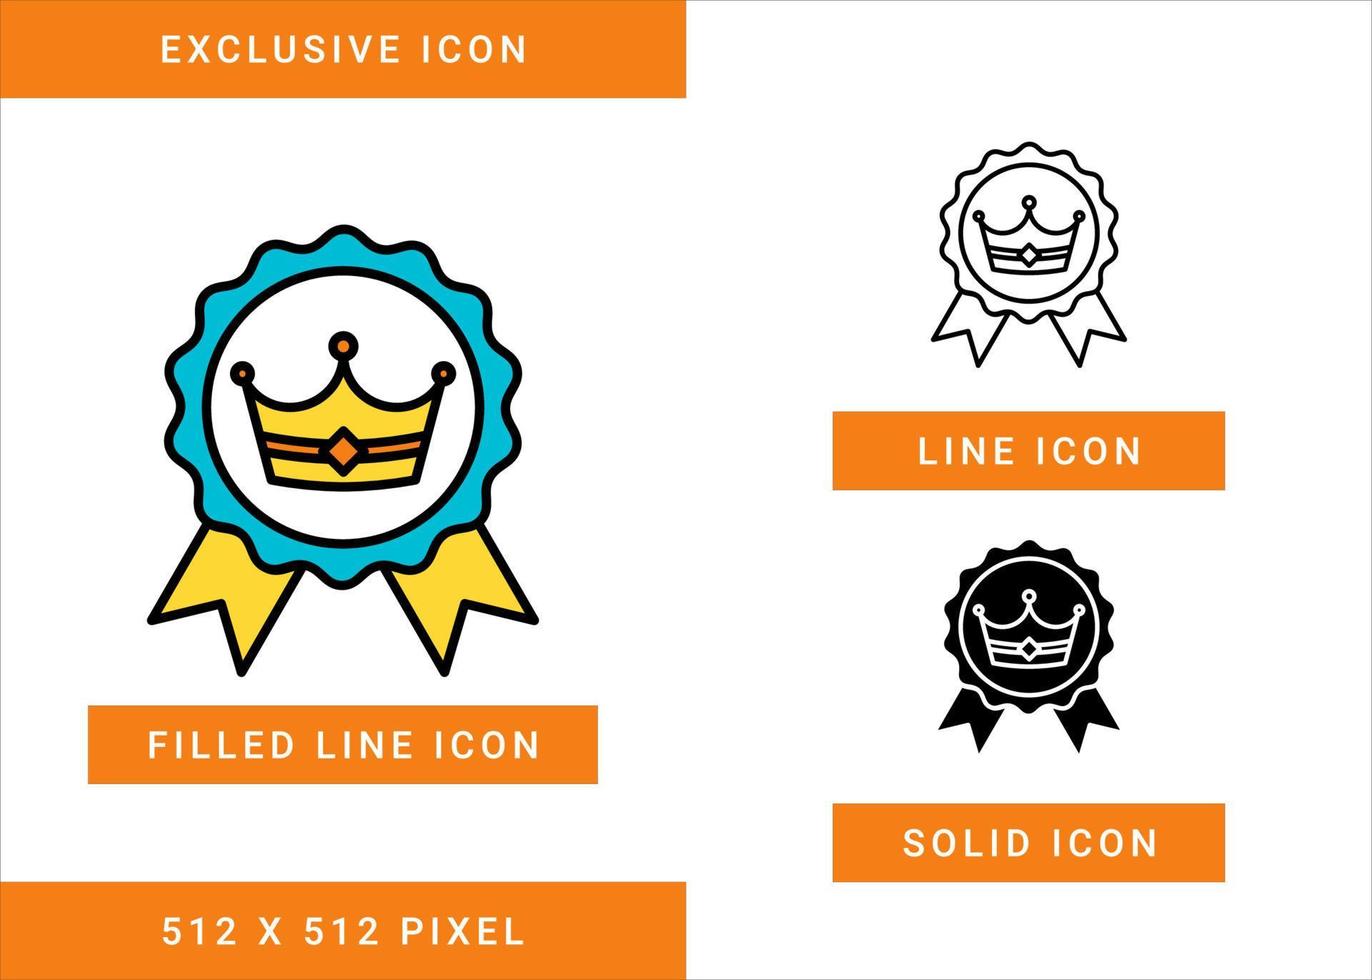 Exclusive icons set vector illustration with solid icon line style. Special customer VIP member symbol. Editable stroke icon on isolated background for web design, user interface, and mobile app